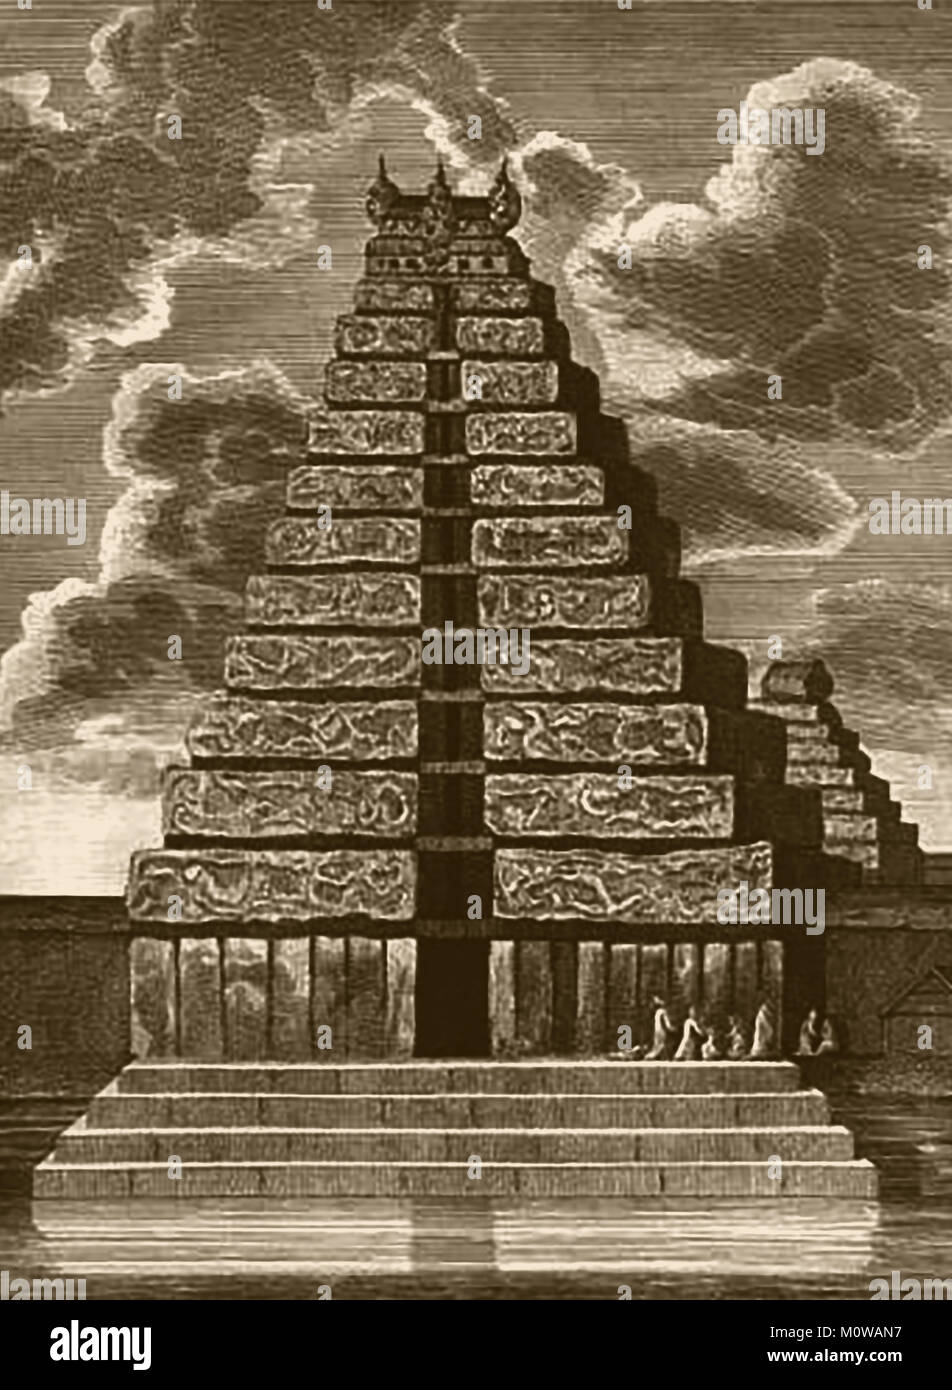 TOWER OF BABEL / BABYLON -Comparative mythology - The Great Pagoda of Tanjore (Thanjavur, India  in  1816, from 'Ruins of Babylon' by Claudius James Rich Stock Photo